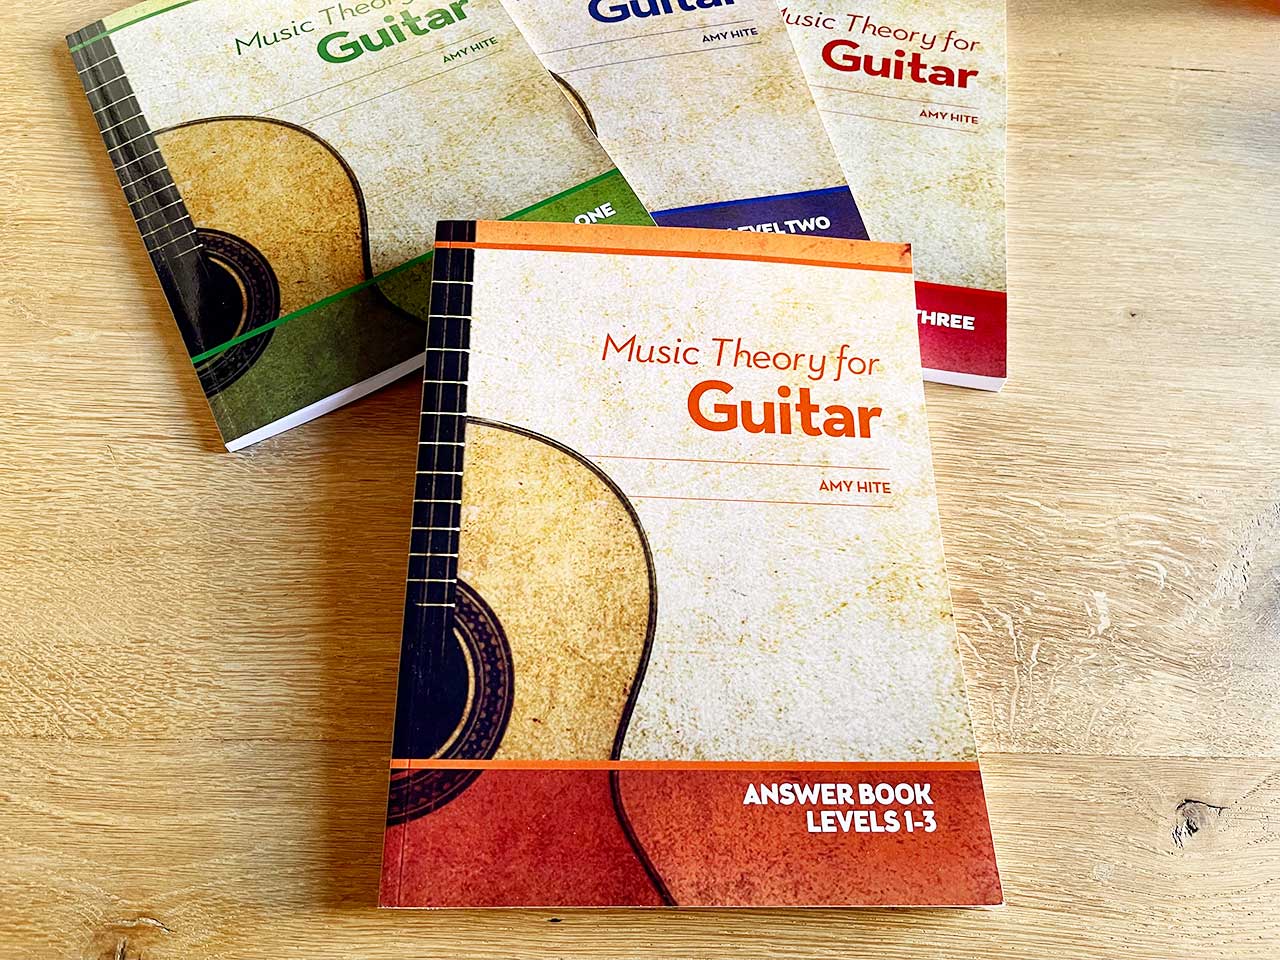 Music Theory for Guitar Workbook Series: Interview with Amy Hite